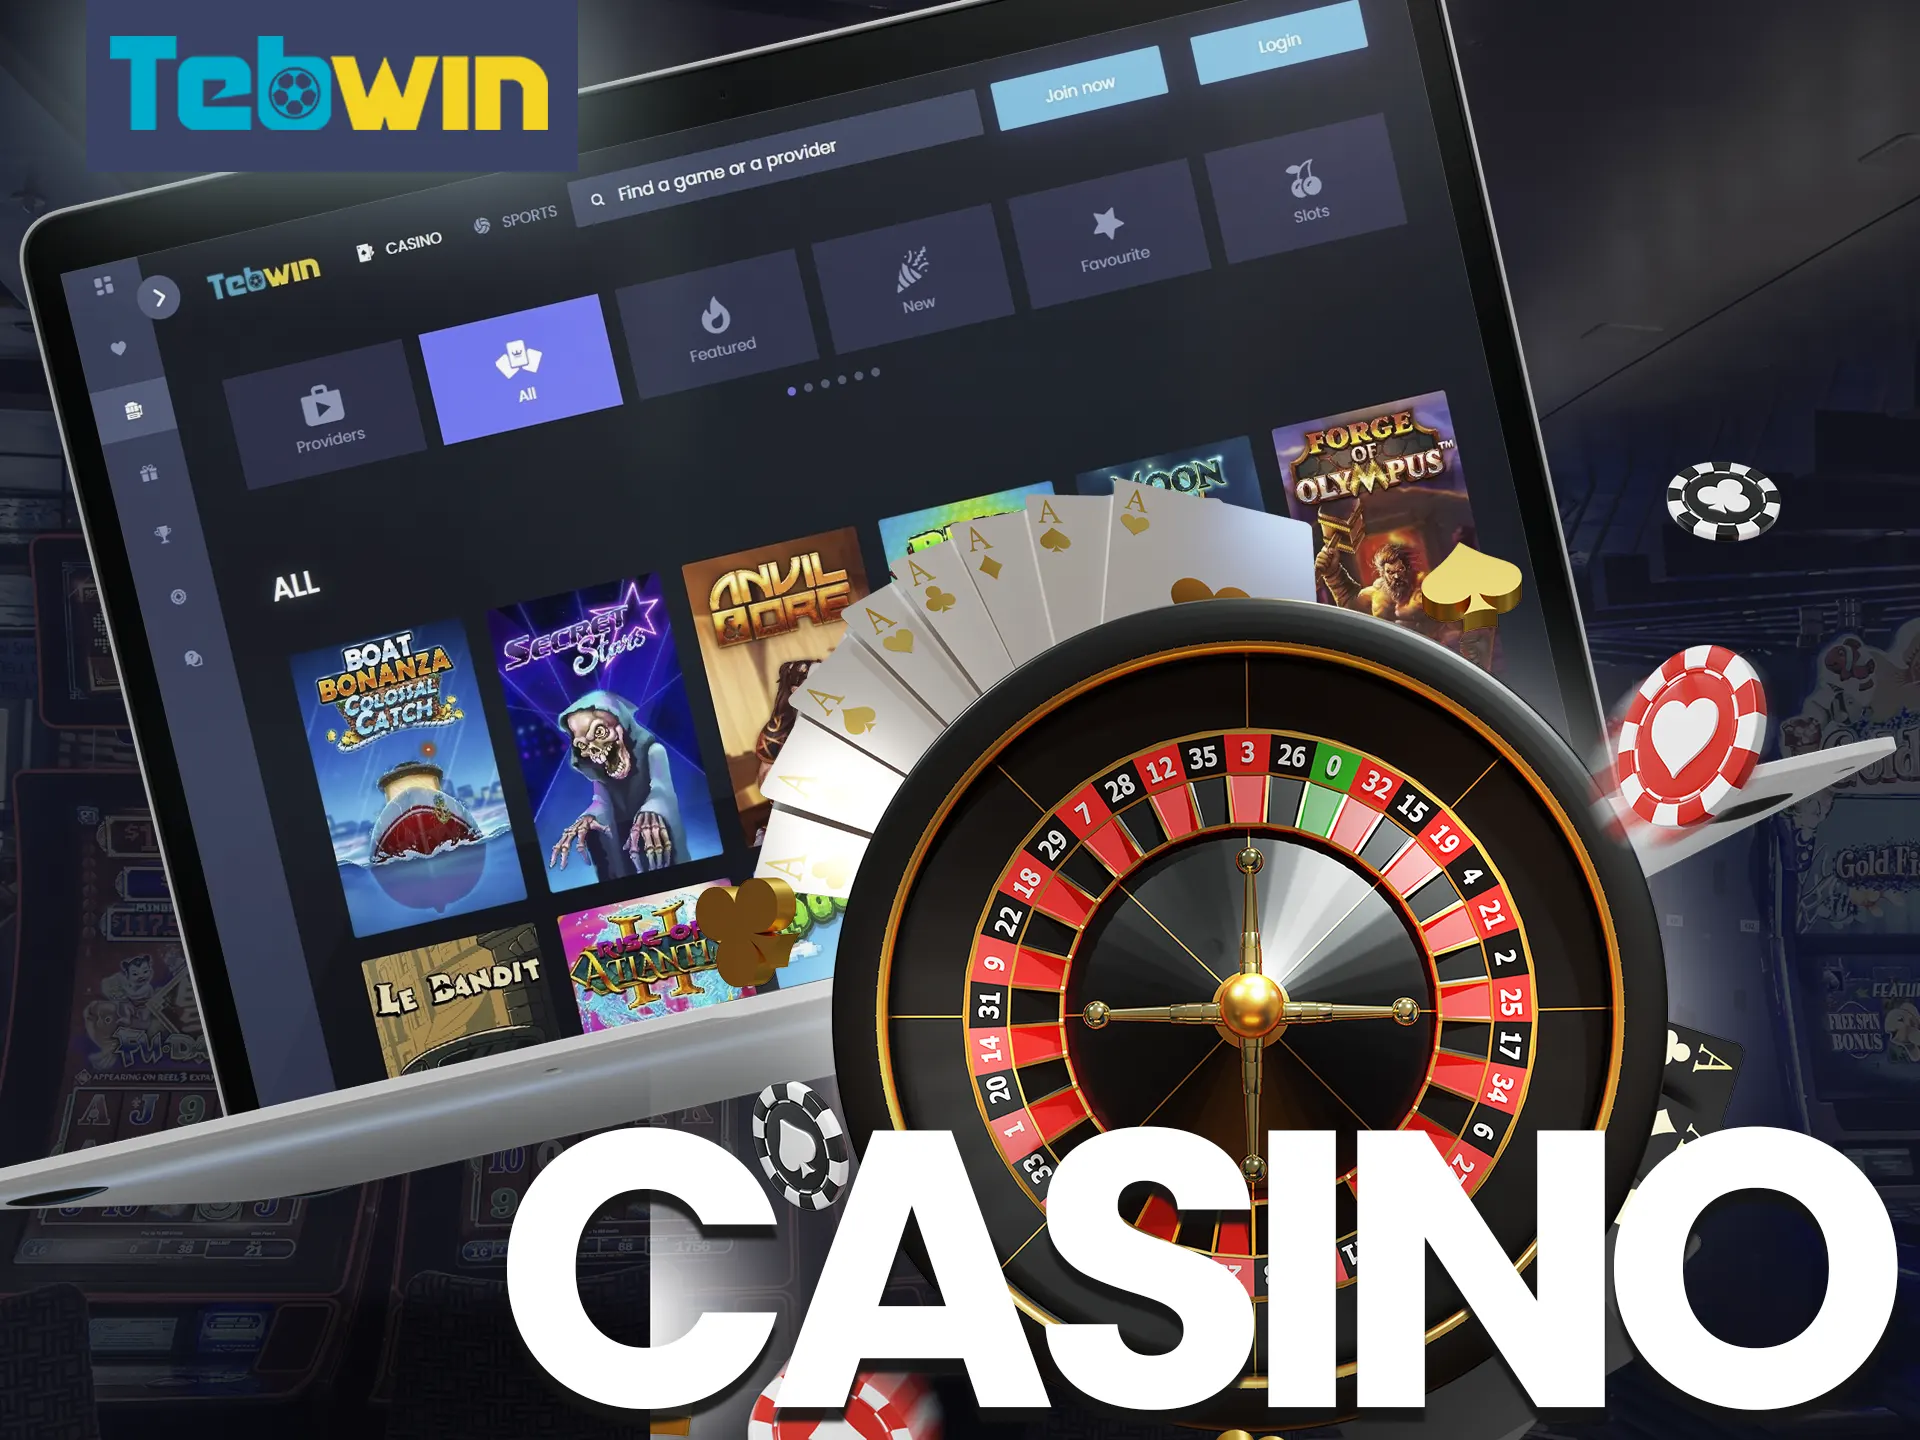 Tebwin online casino offers a large selection of games.